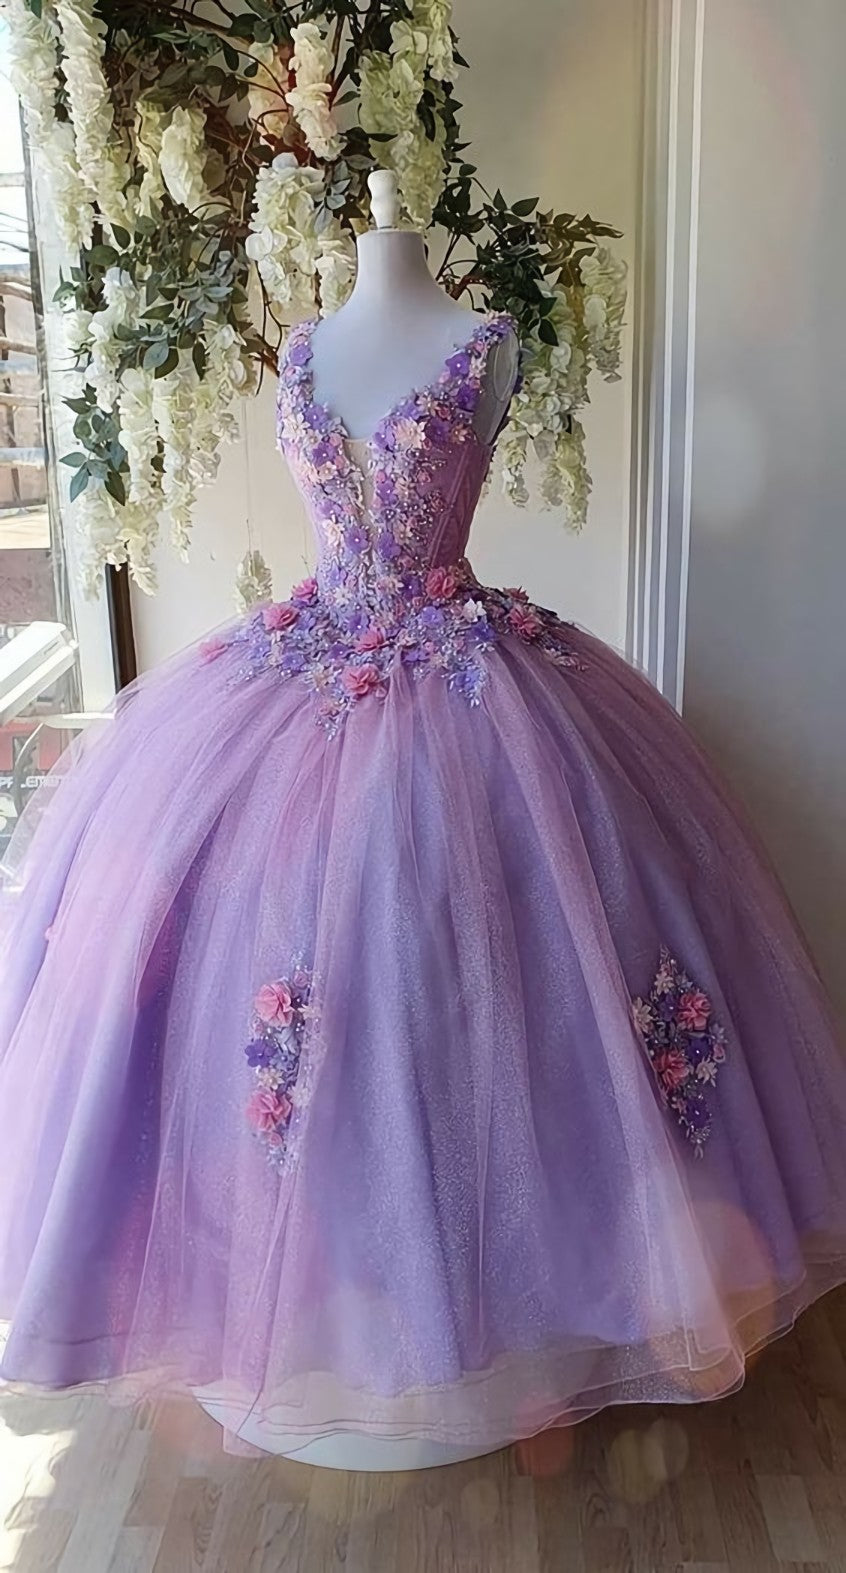 Princess Tulle Long Prom Dress Outfits For Women with Flower,Ball Gowns Quinceanera Dresses